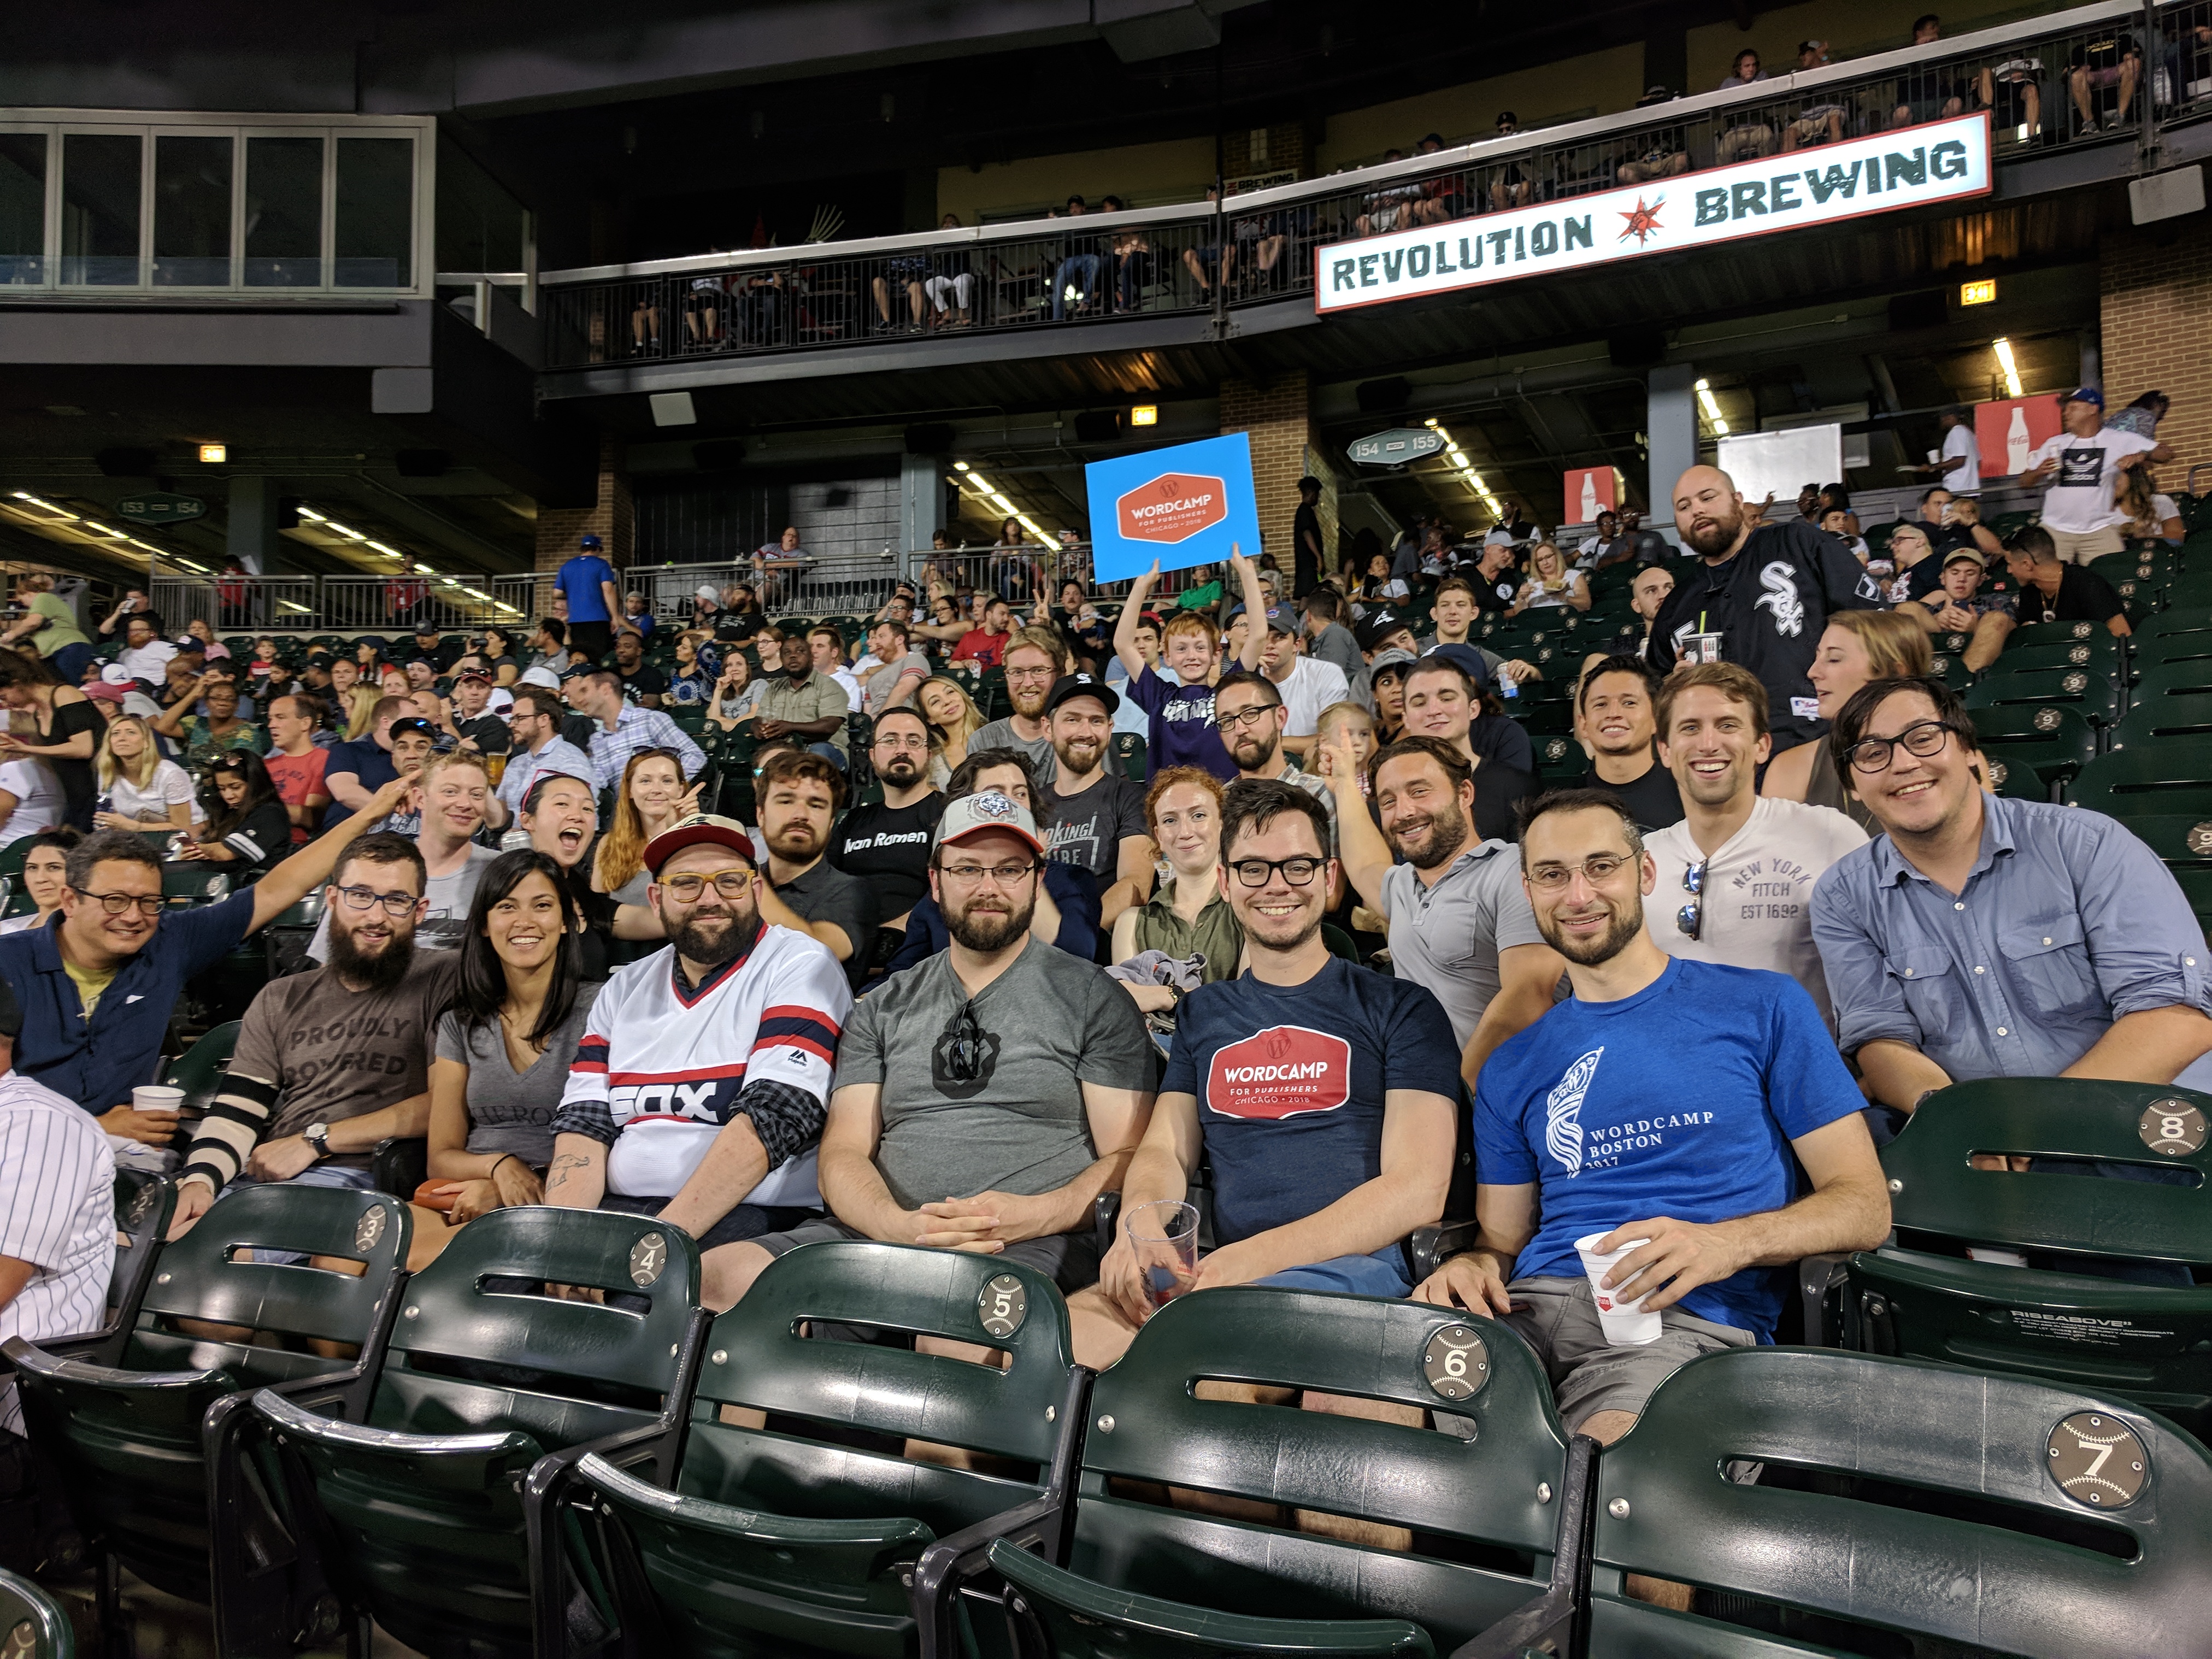 A group of people sitting in the stands of a baseball stadium